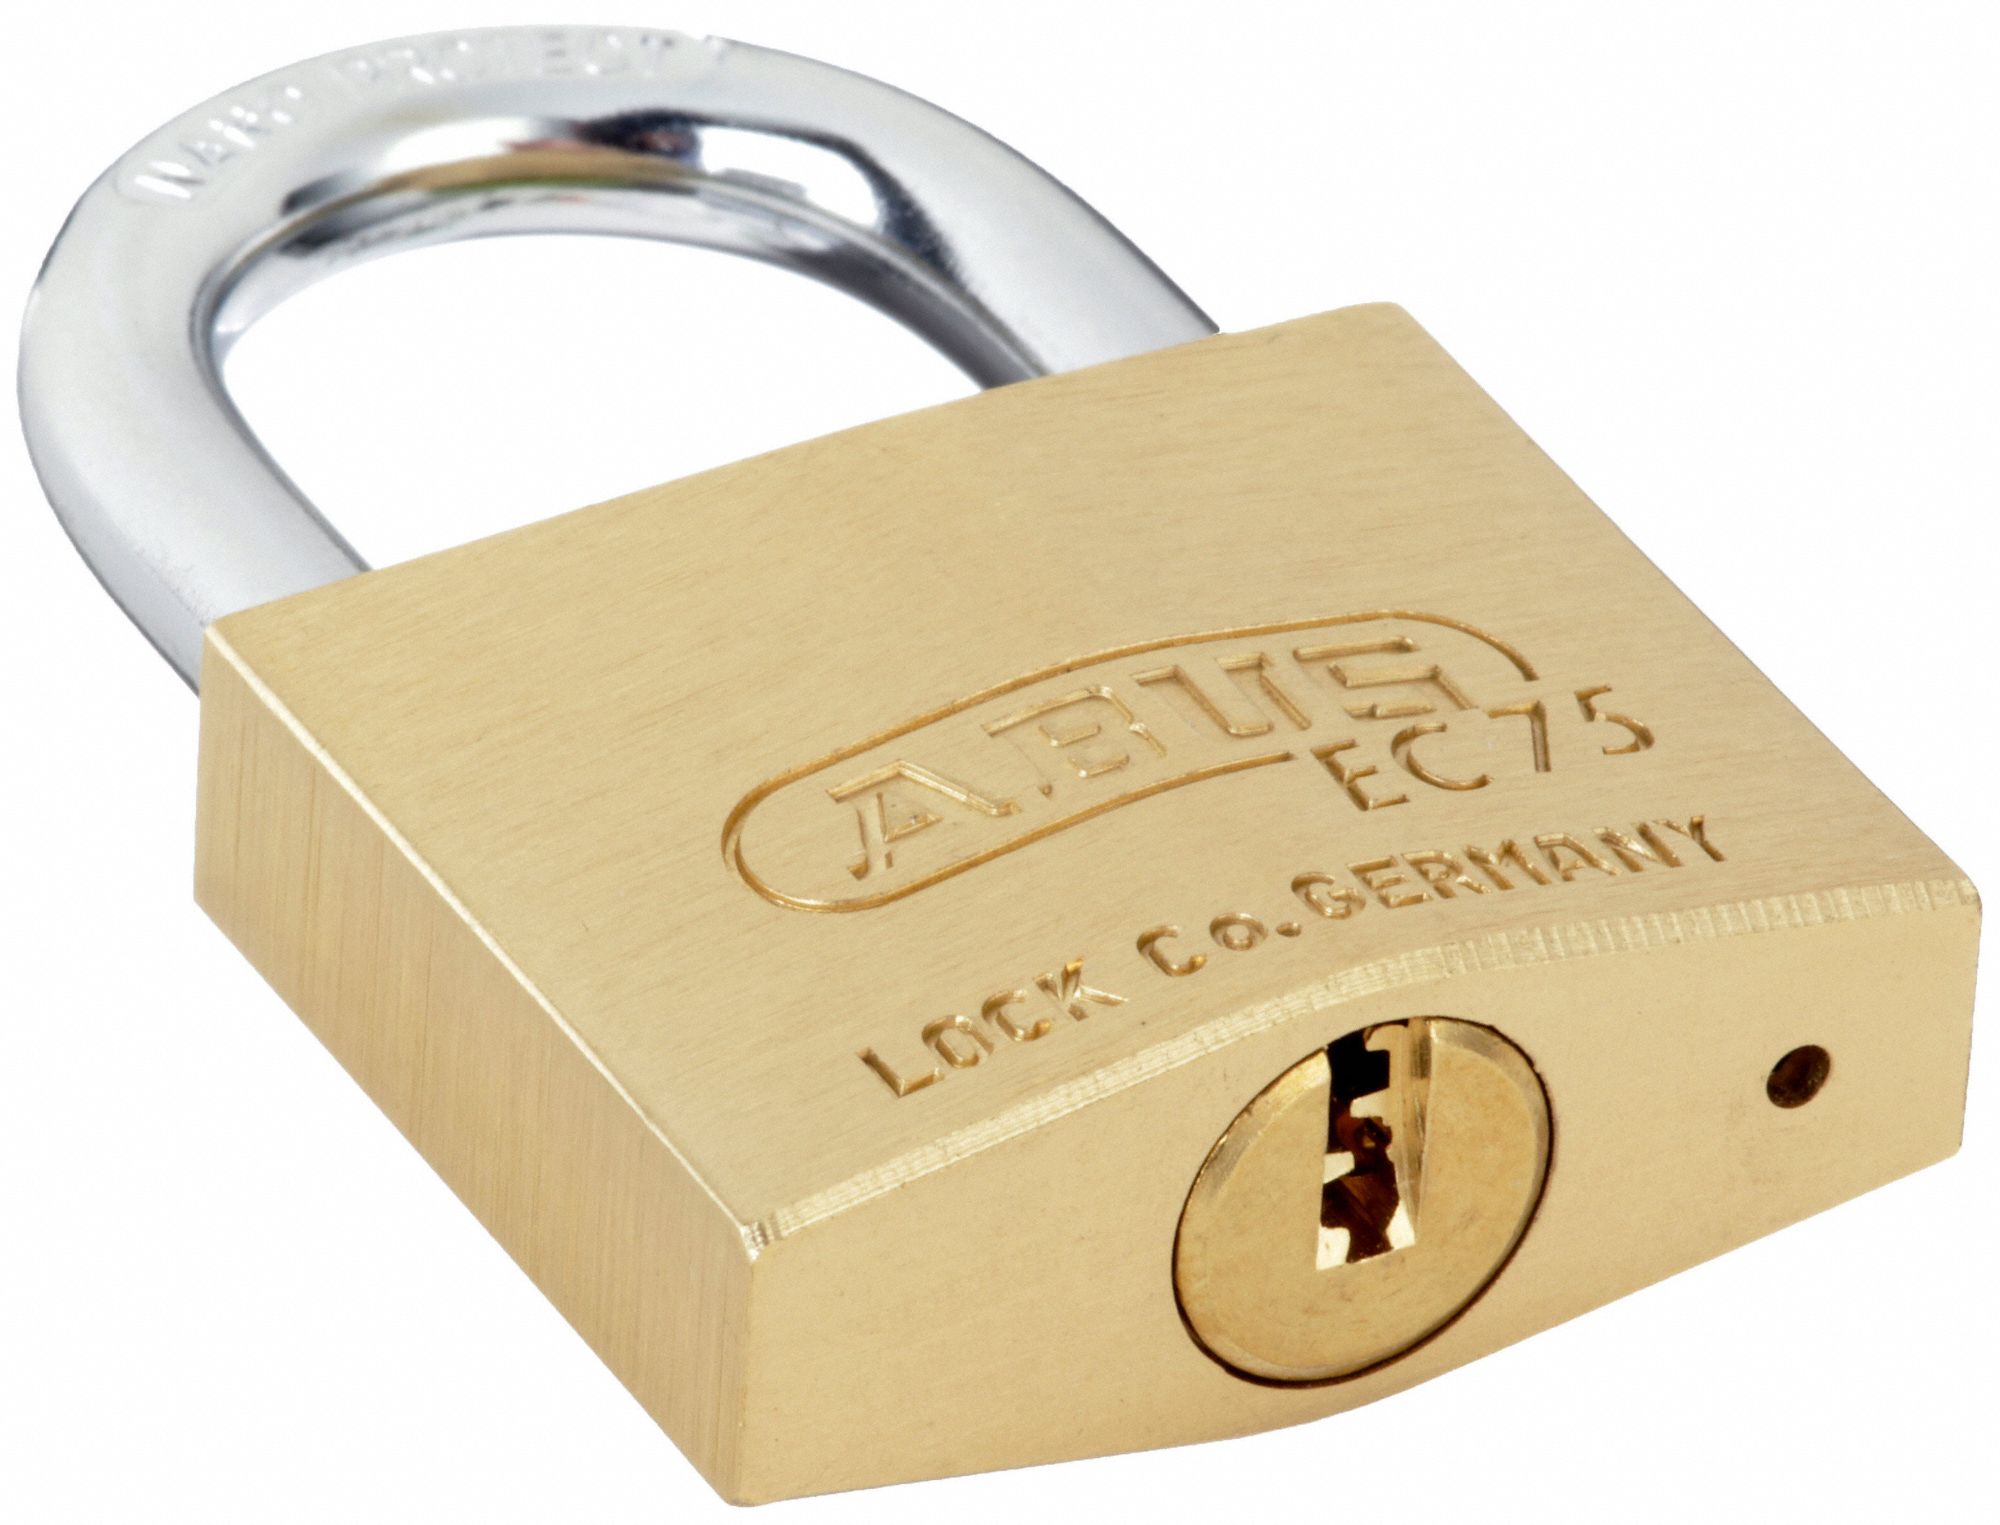 Padlock: 7/8 in Vertical Shackle Clearance, 55/64 in Horizontal Shackle  Clearance, 7345 Key, ABUS